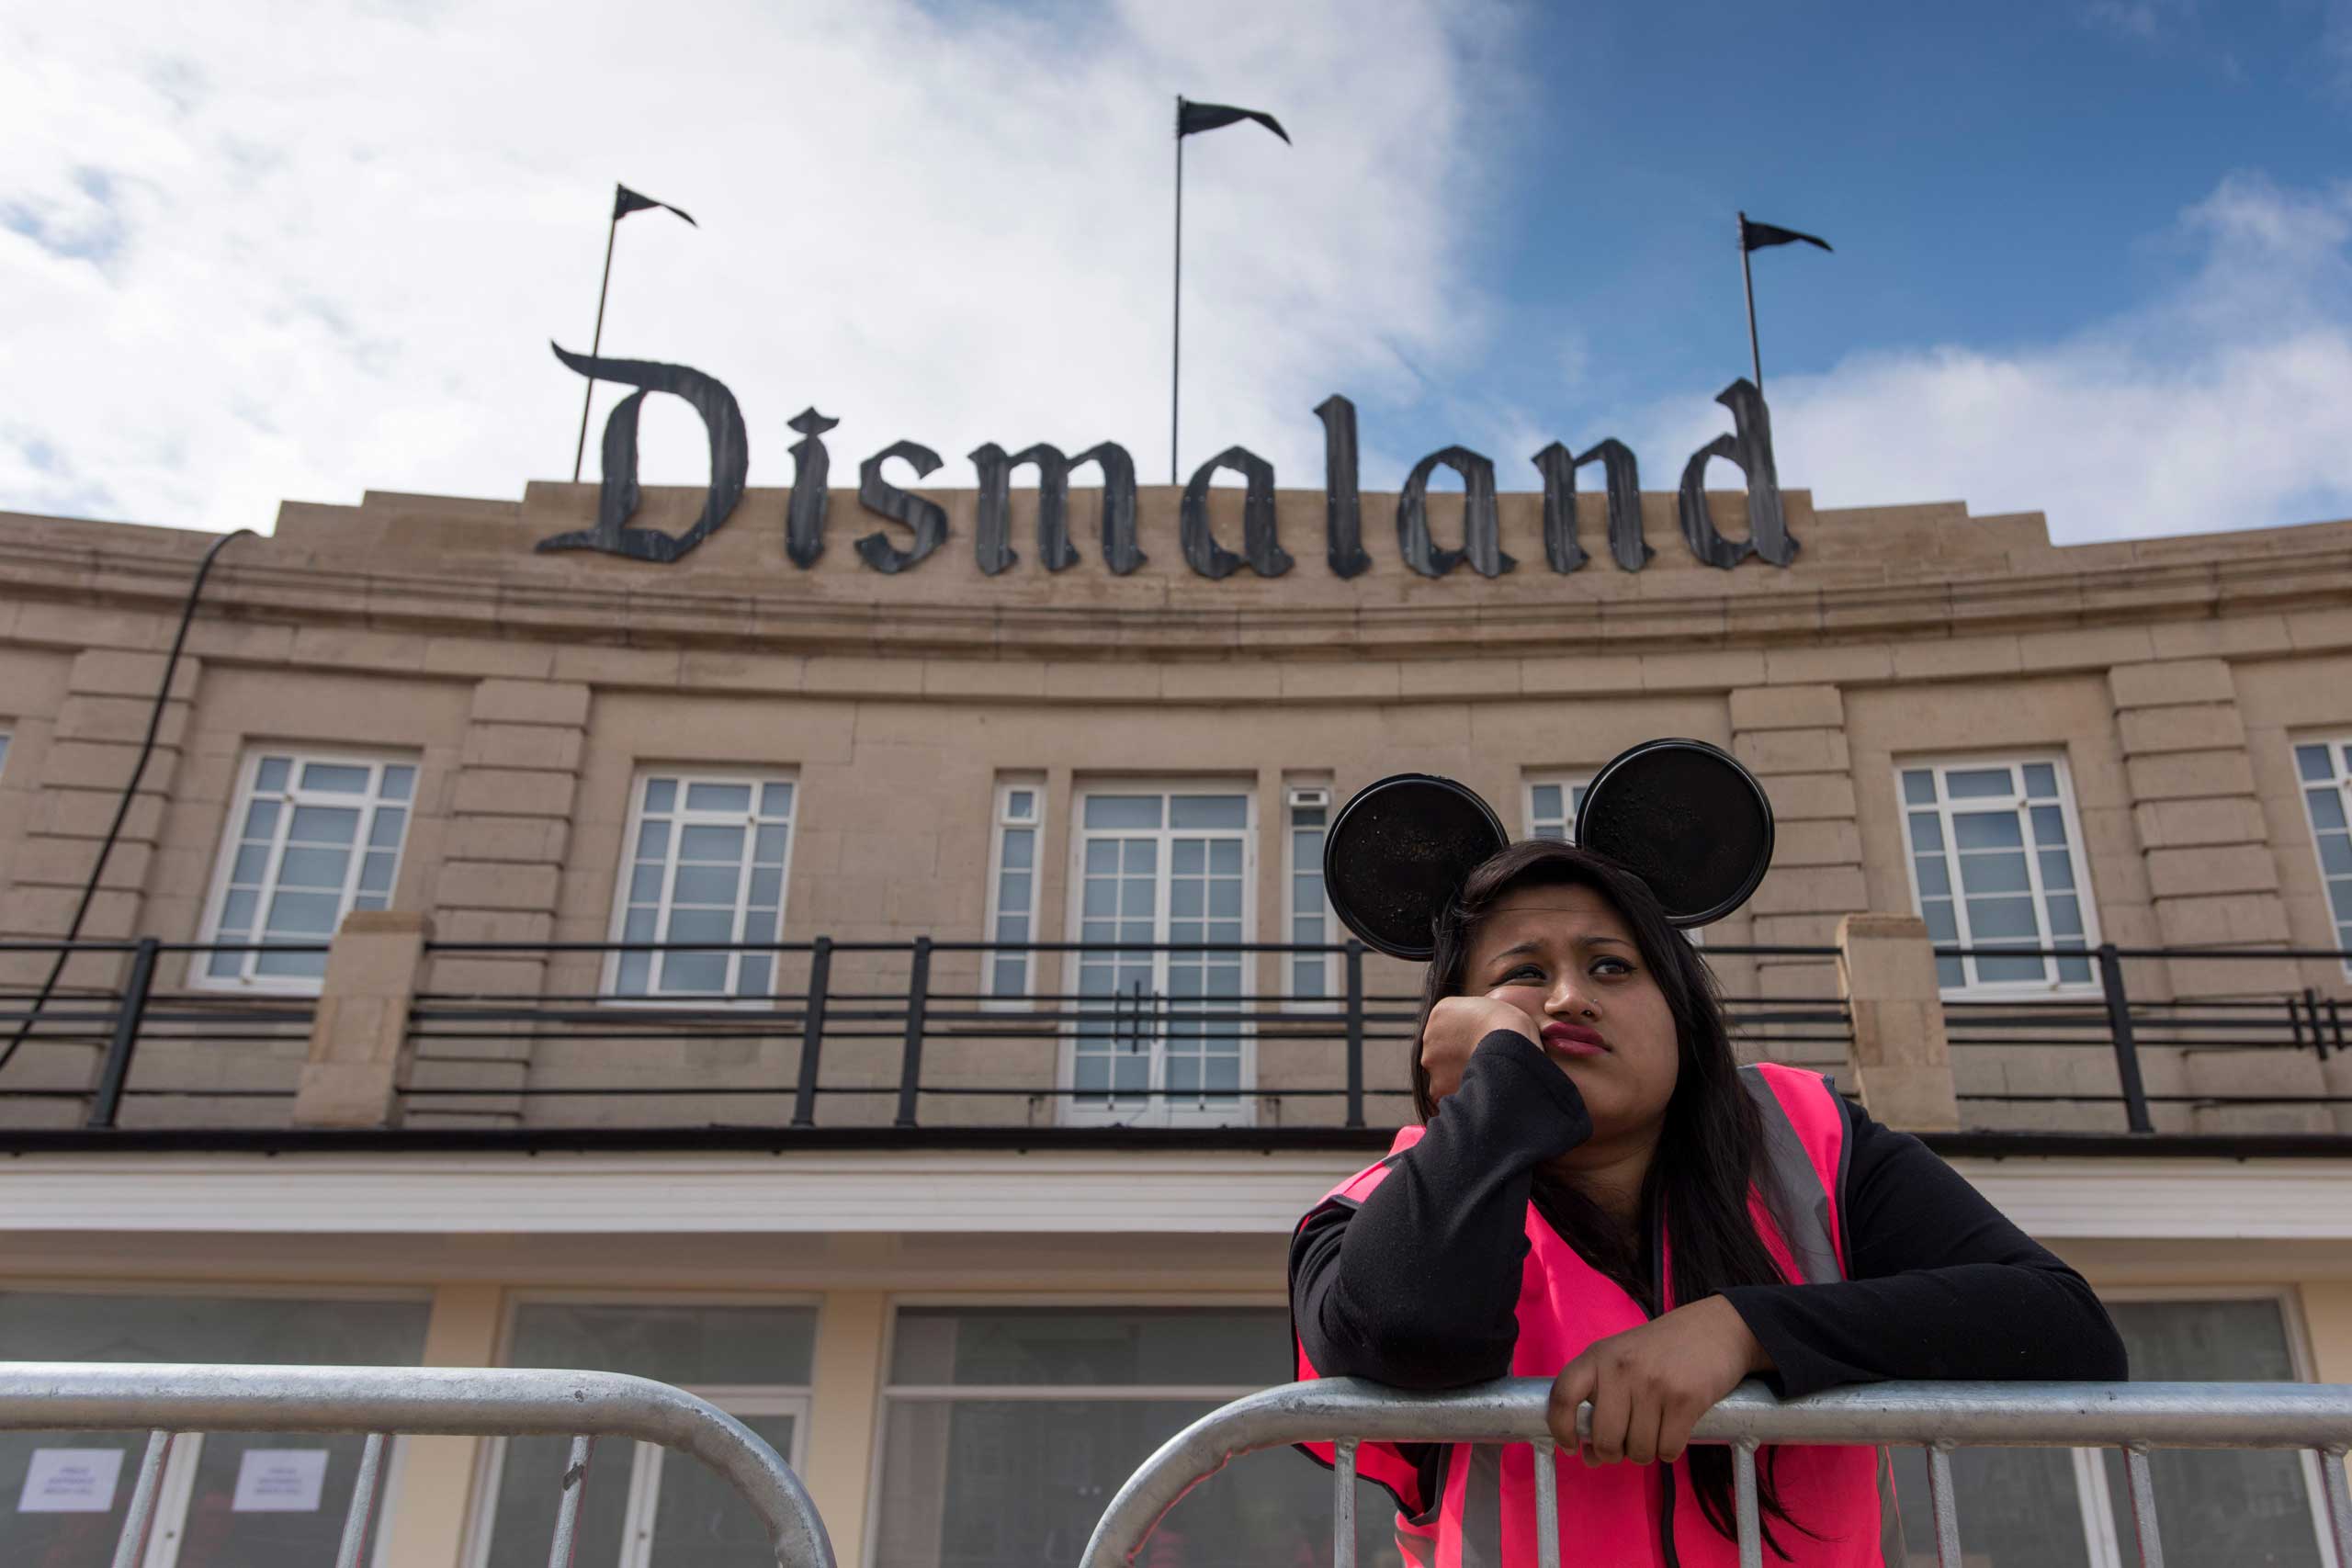 A steward is seen outside Bansky's 'Dismaland' exhibition, which opens tomorrow, at a derelict seafront lido in Weston-Super-Mare, England, on Aug. 20, 2015. (Matthew Horwood—Getty Images)